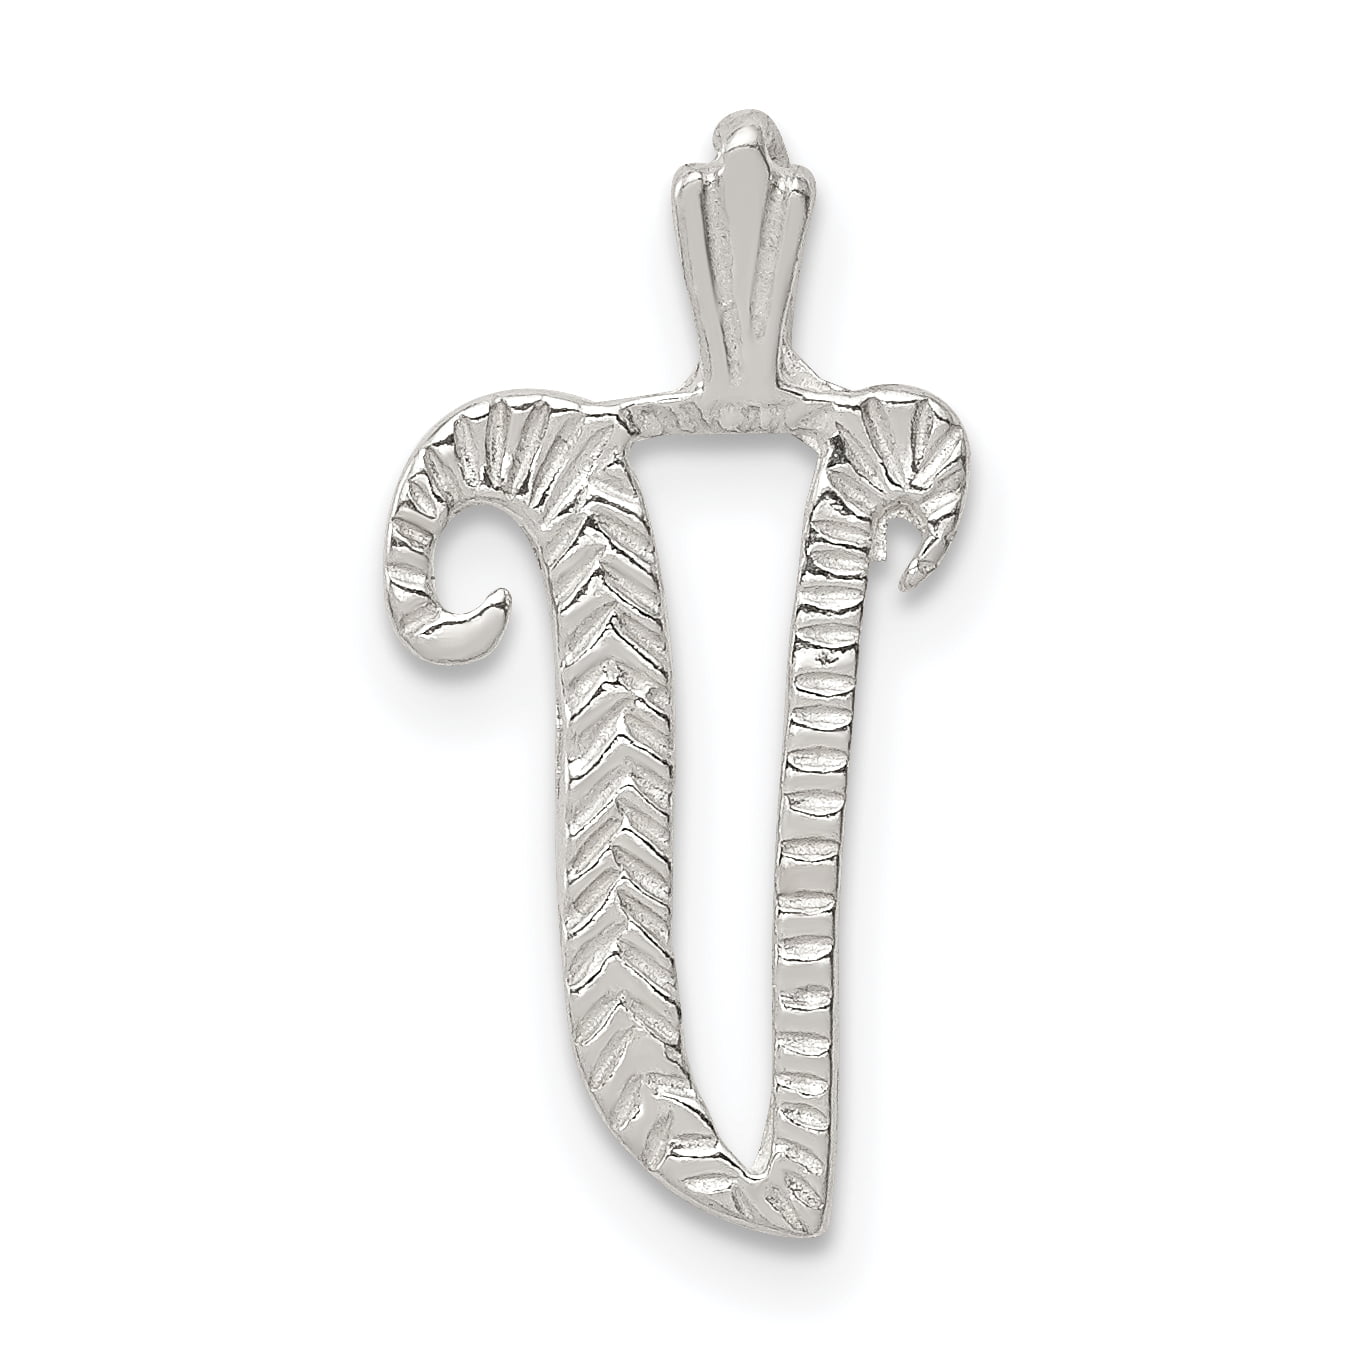 Solid 925 Sterling Silver Polished & Textured Letter A Chain Slide Pendant